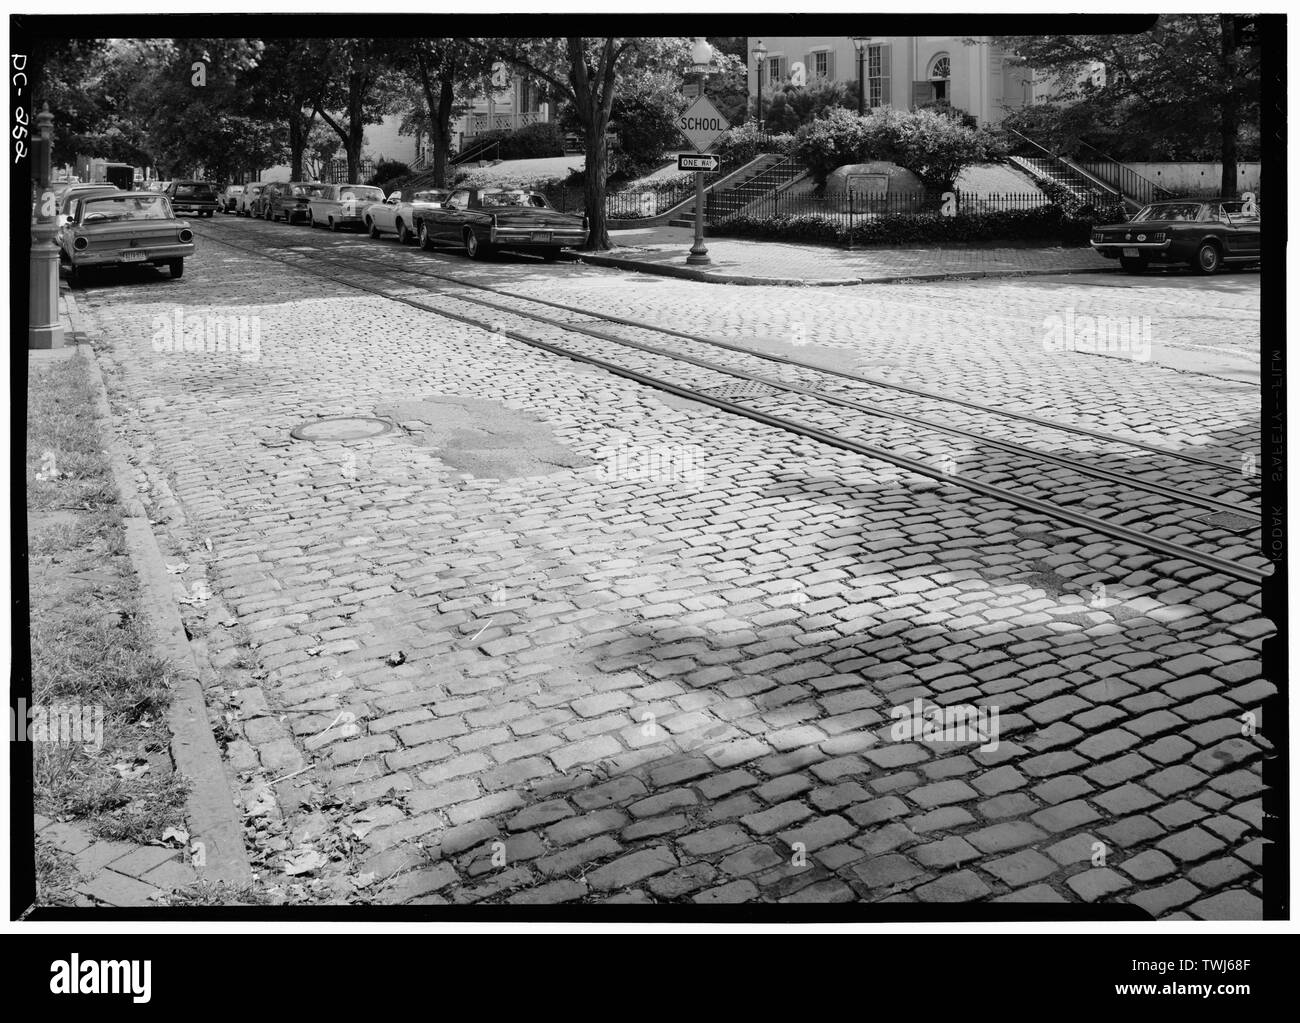 September 1969 PAVING BLOCKS AND STREET CAR RAILS O STREET AT POTOMAC STREET, LOOKING SOUTHEAST - Georgetown Street Furniture, Georgetown Vicinity, Washington, District of Columbia, DC Stock Photo